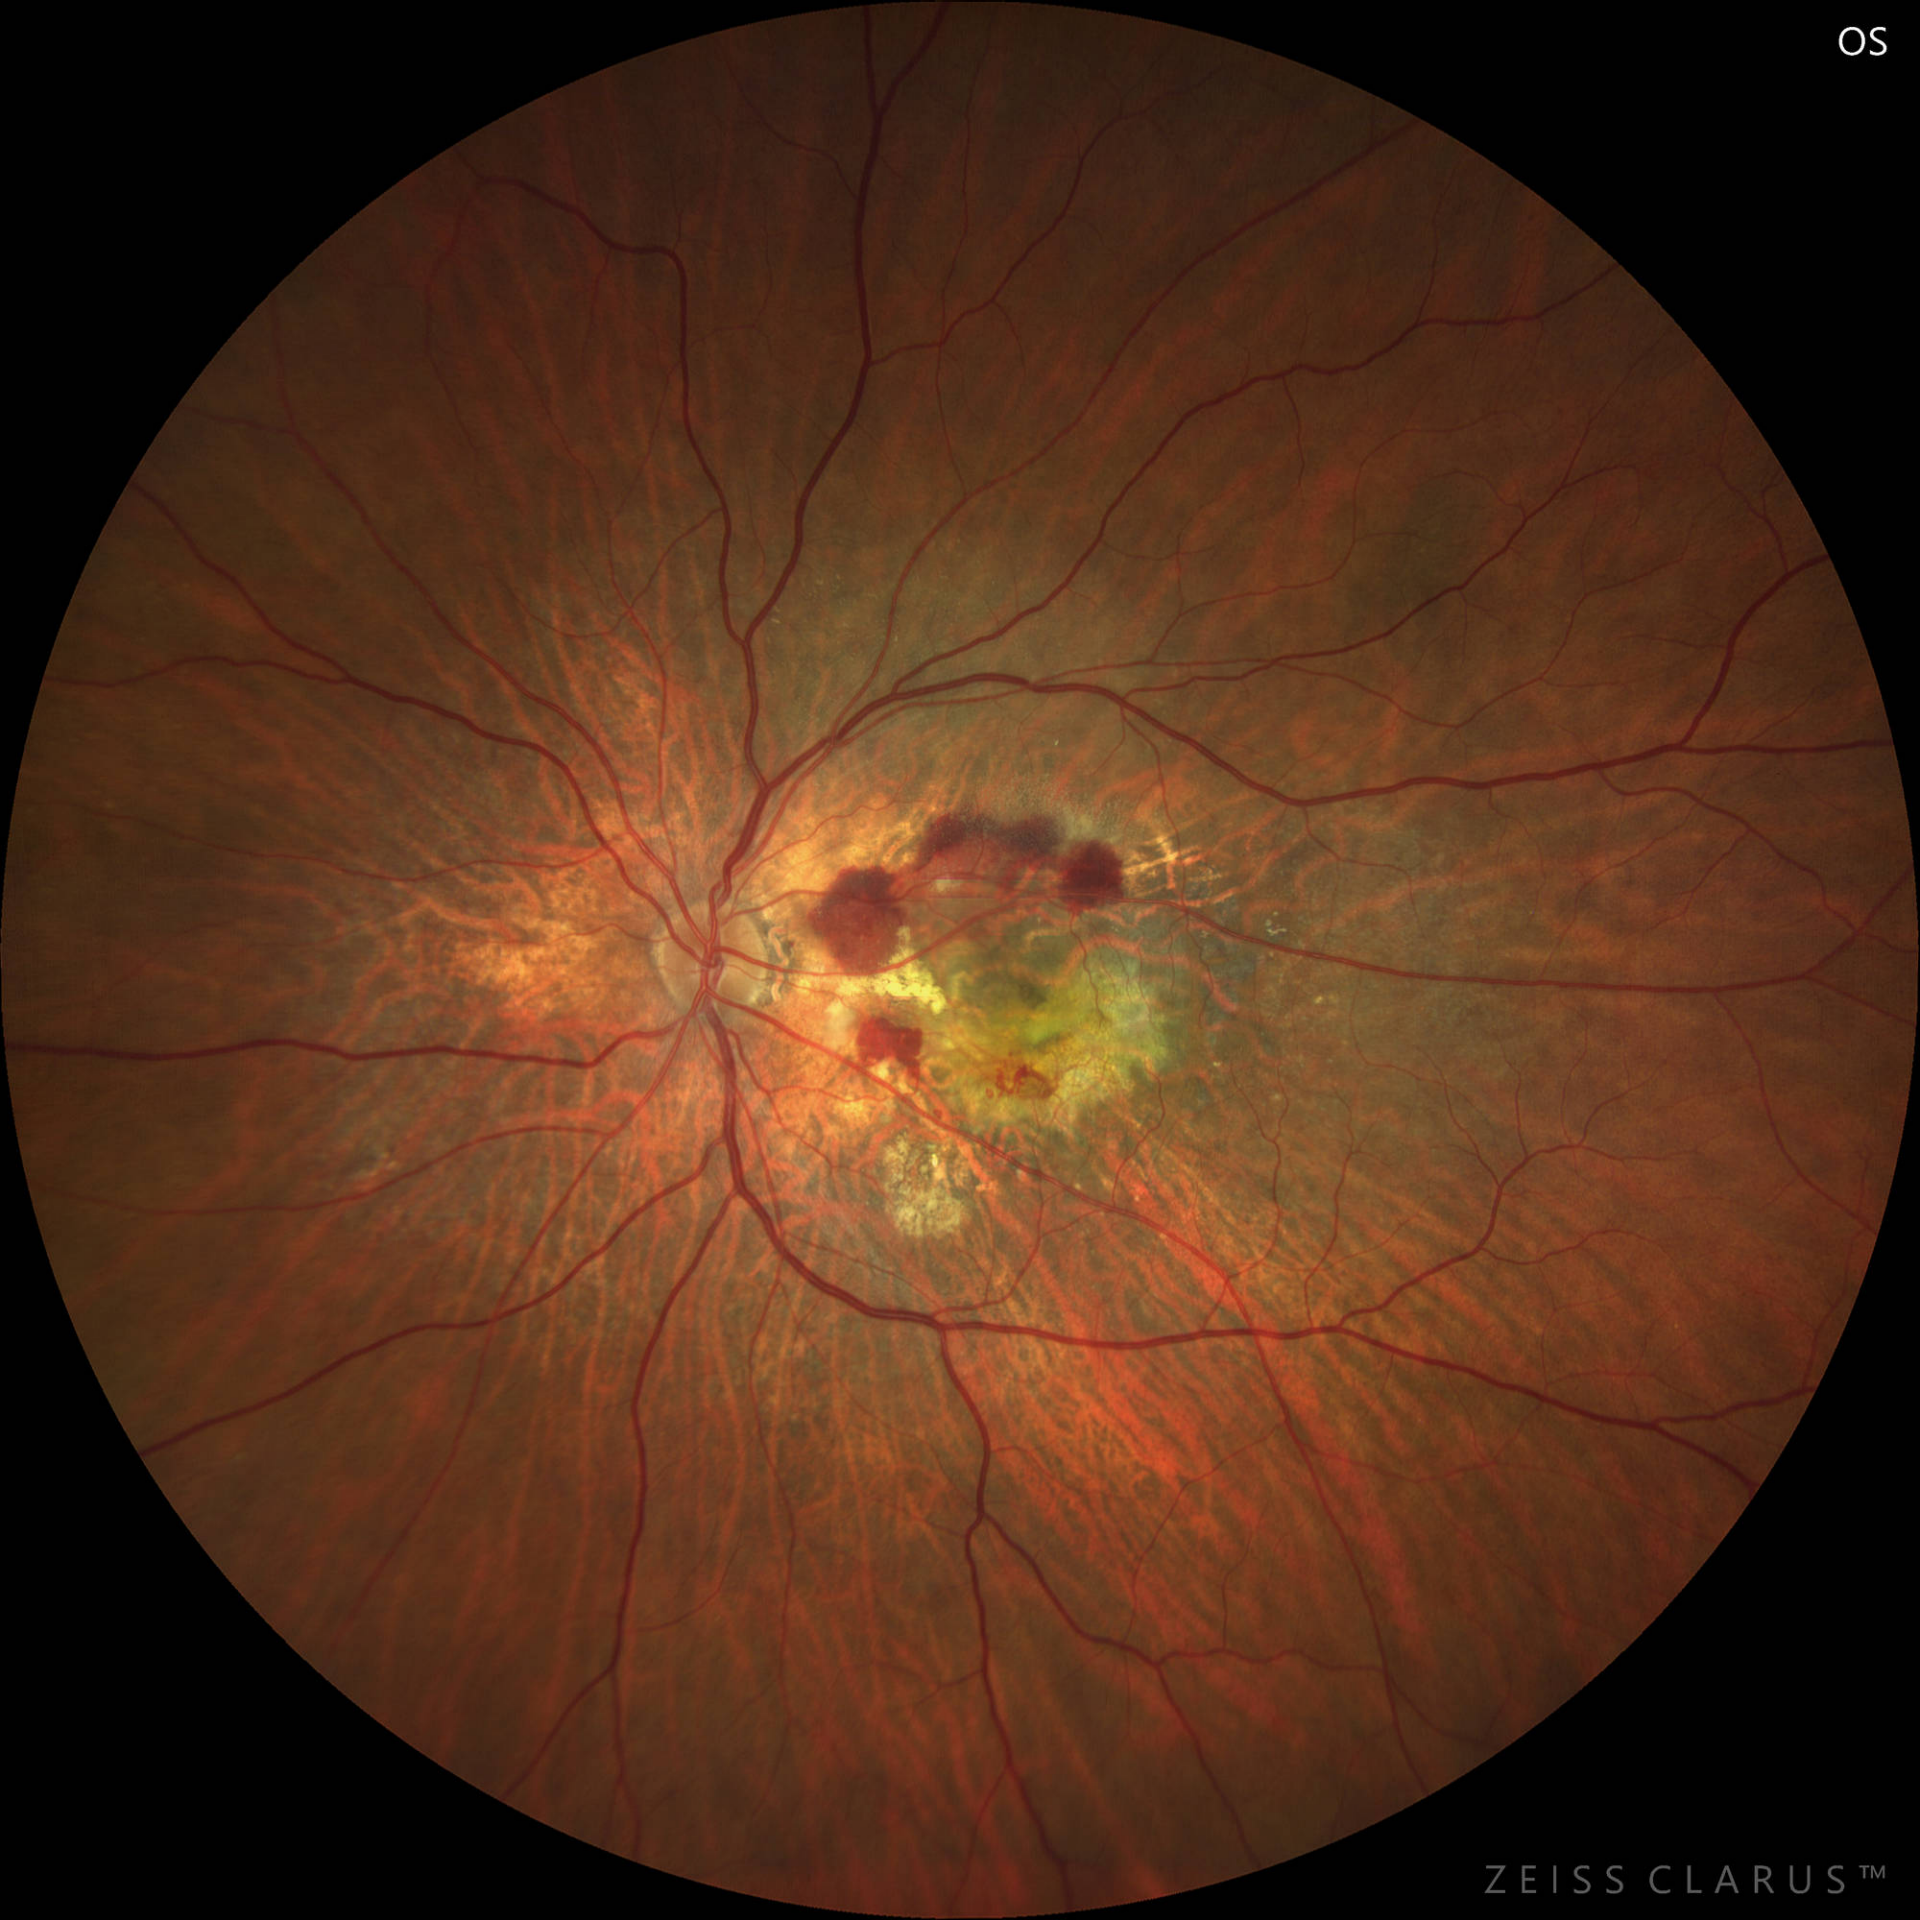 WF 133° magnified image of the macula. Subretinal hemorrhages and gray lesions visible in the macula.